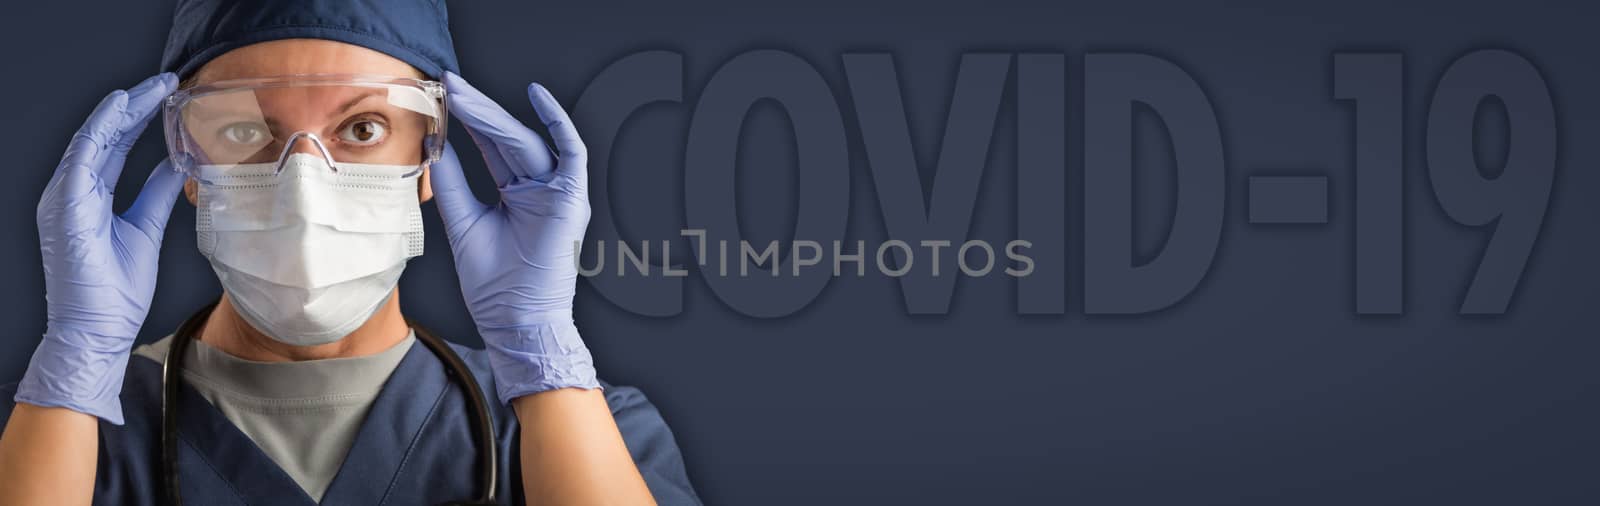 Banner of Female Doctor or Nurse In Medical Face Mask and Protective Gear With COVID-19 Text Behind. by Feverpitched